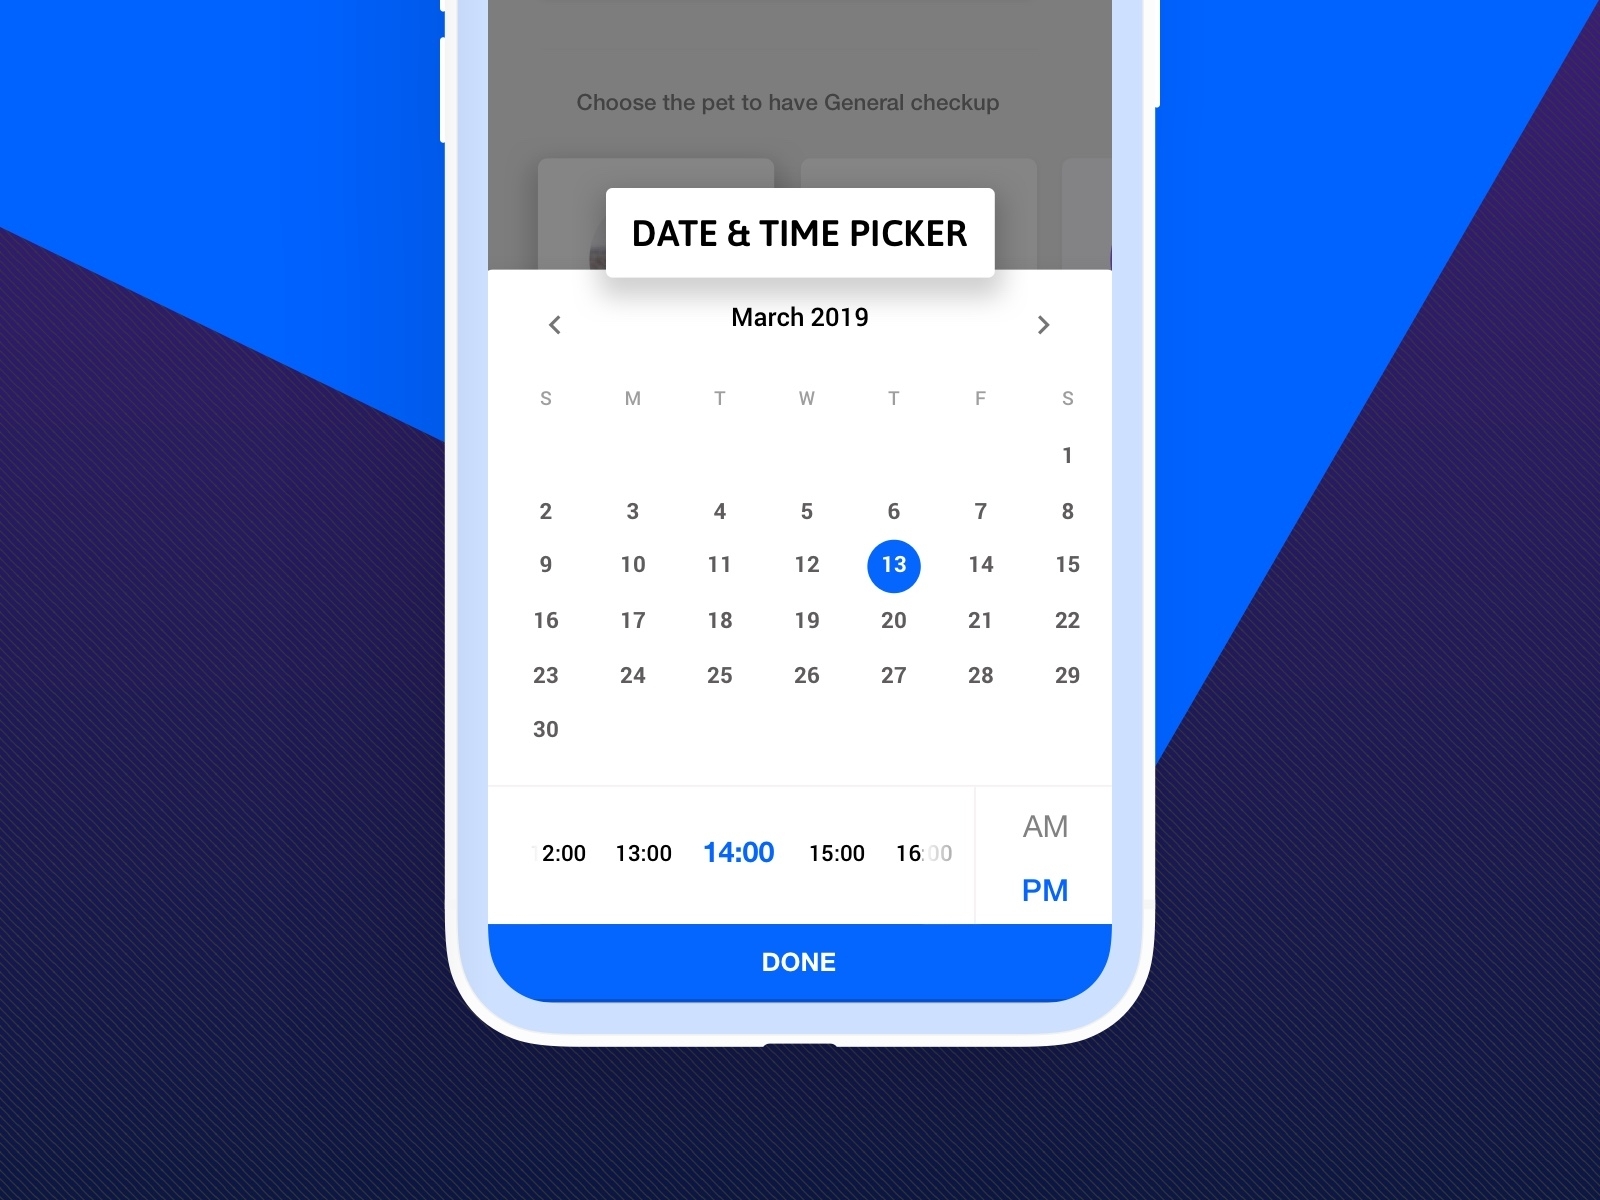 Date and Time picker UI by Prem kumar on Dribbble